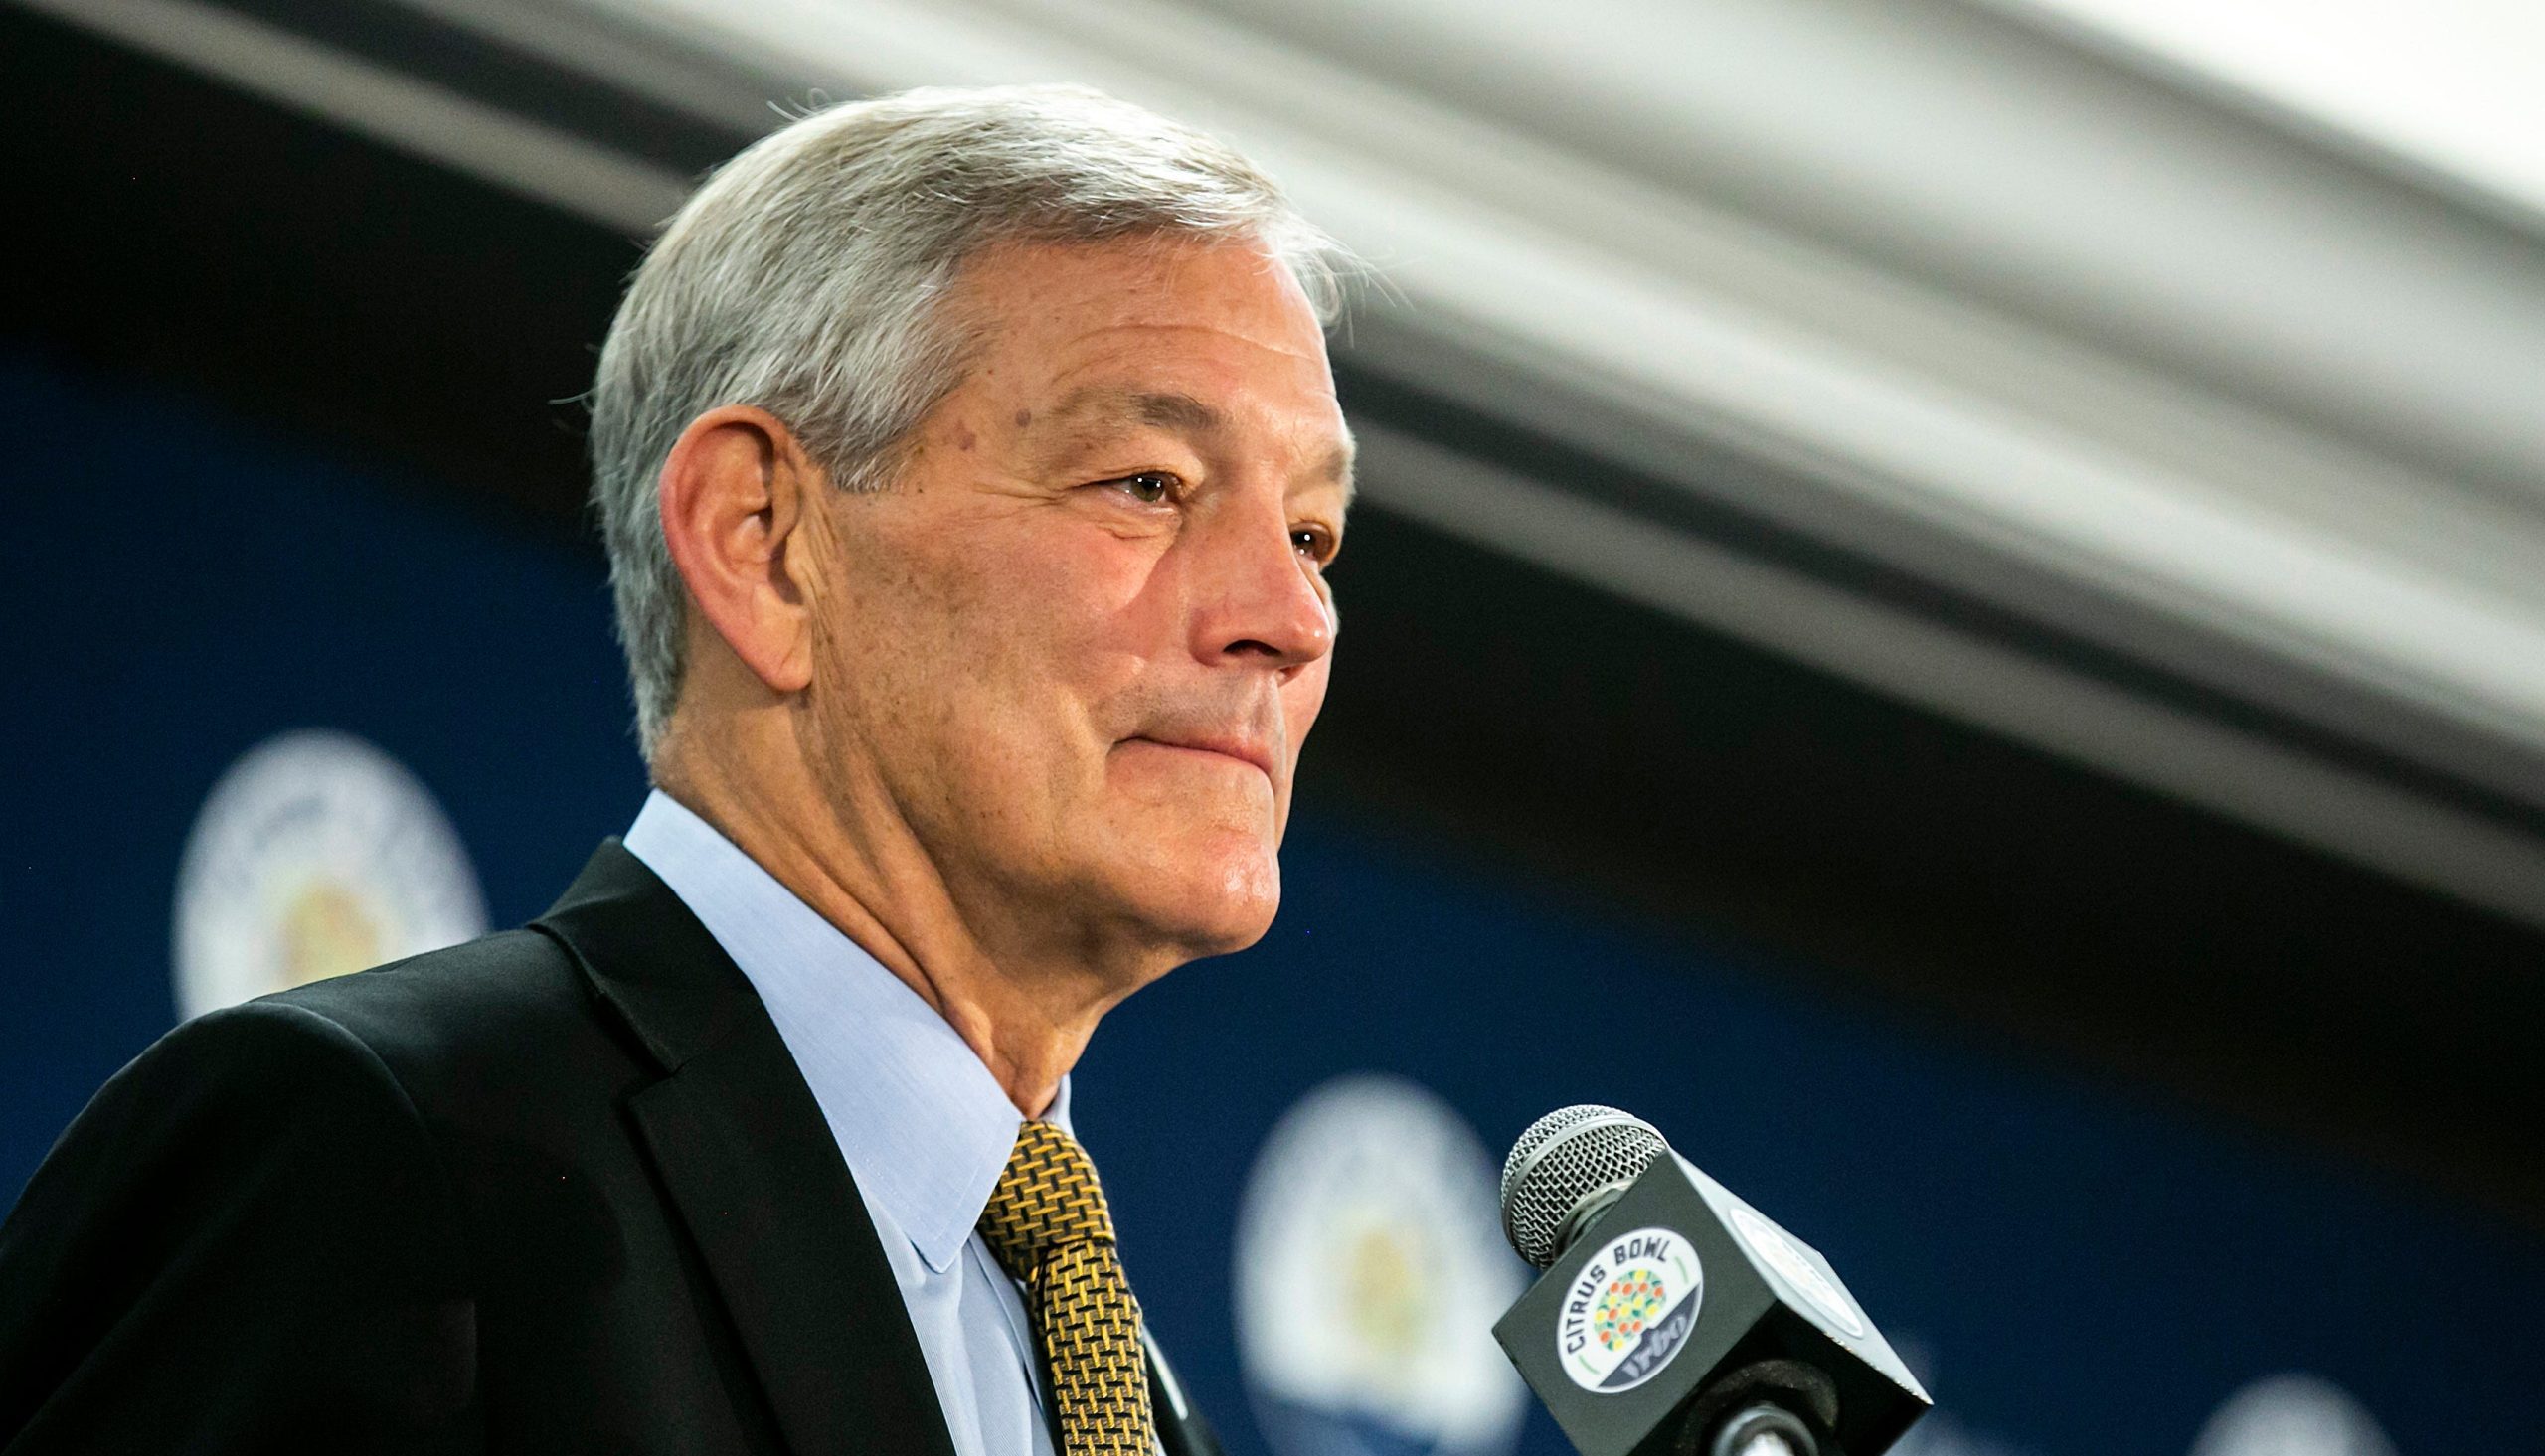 College football world reacts to insane Kirk Ferentz buyout